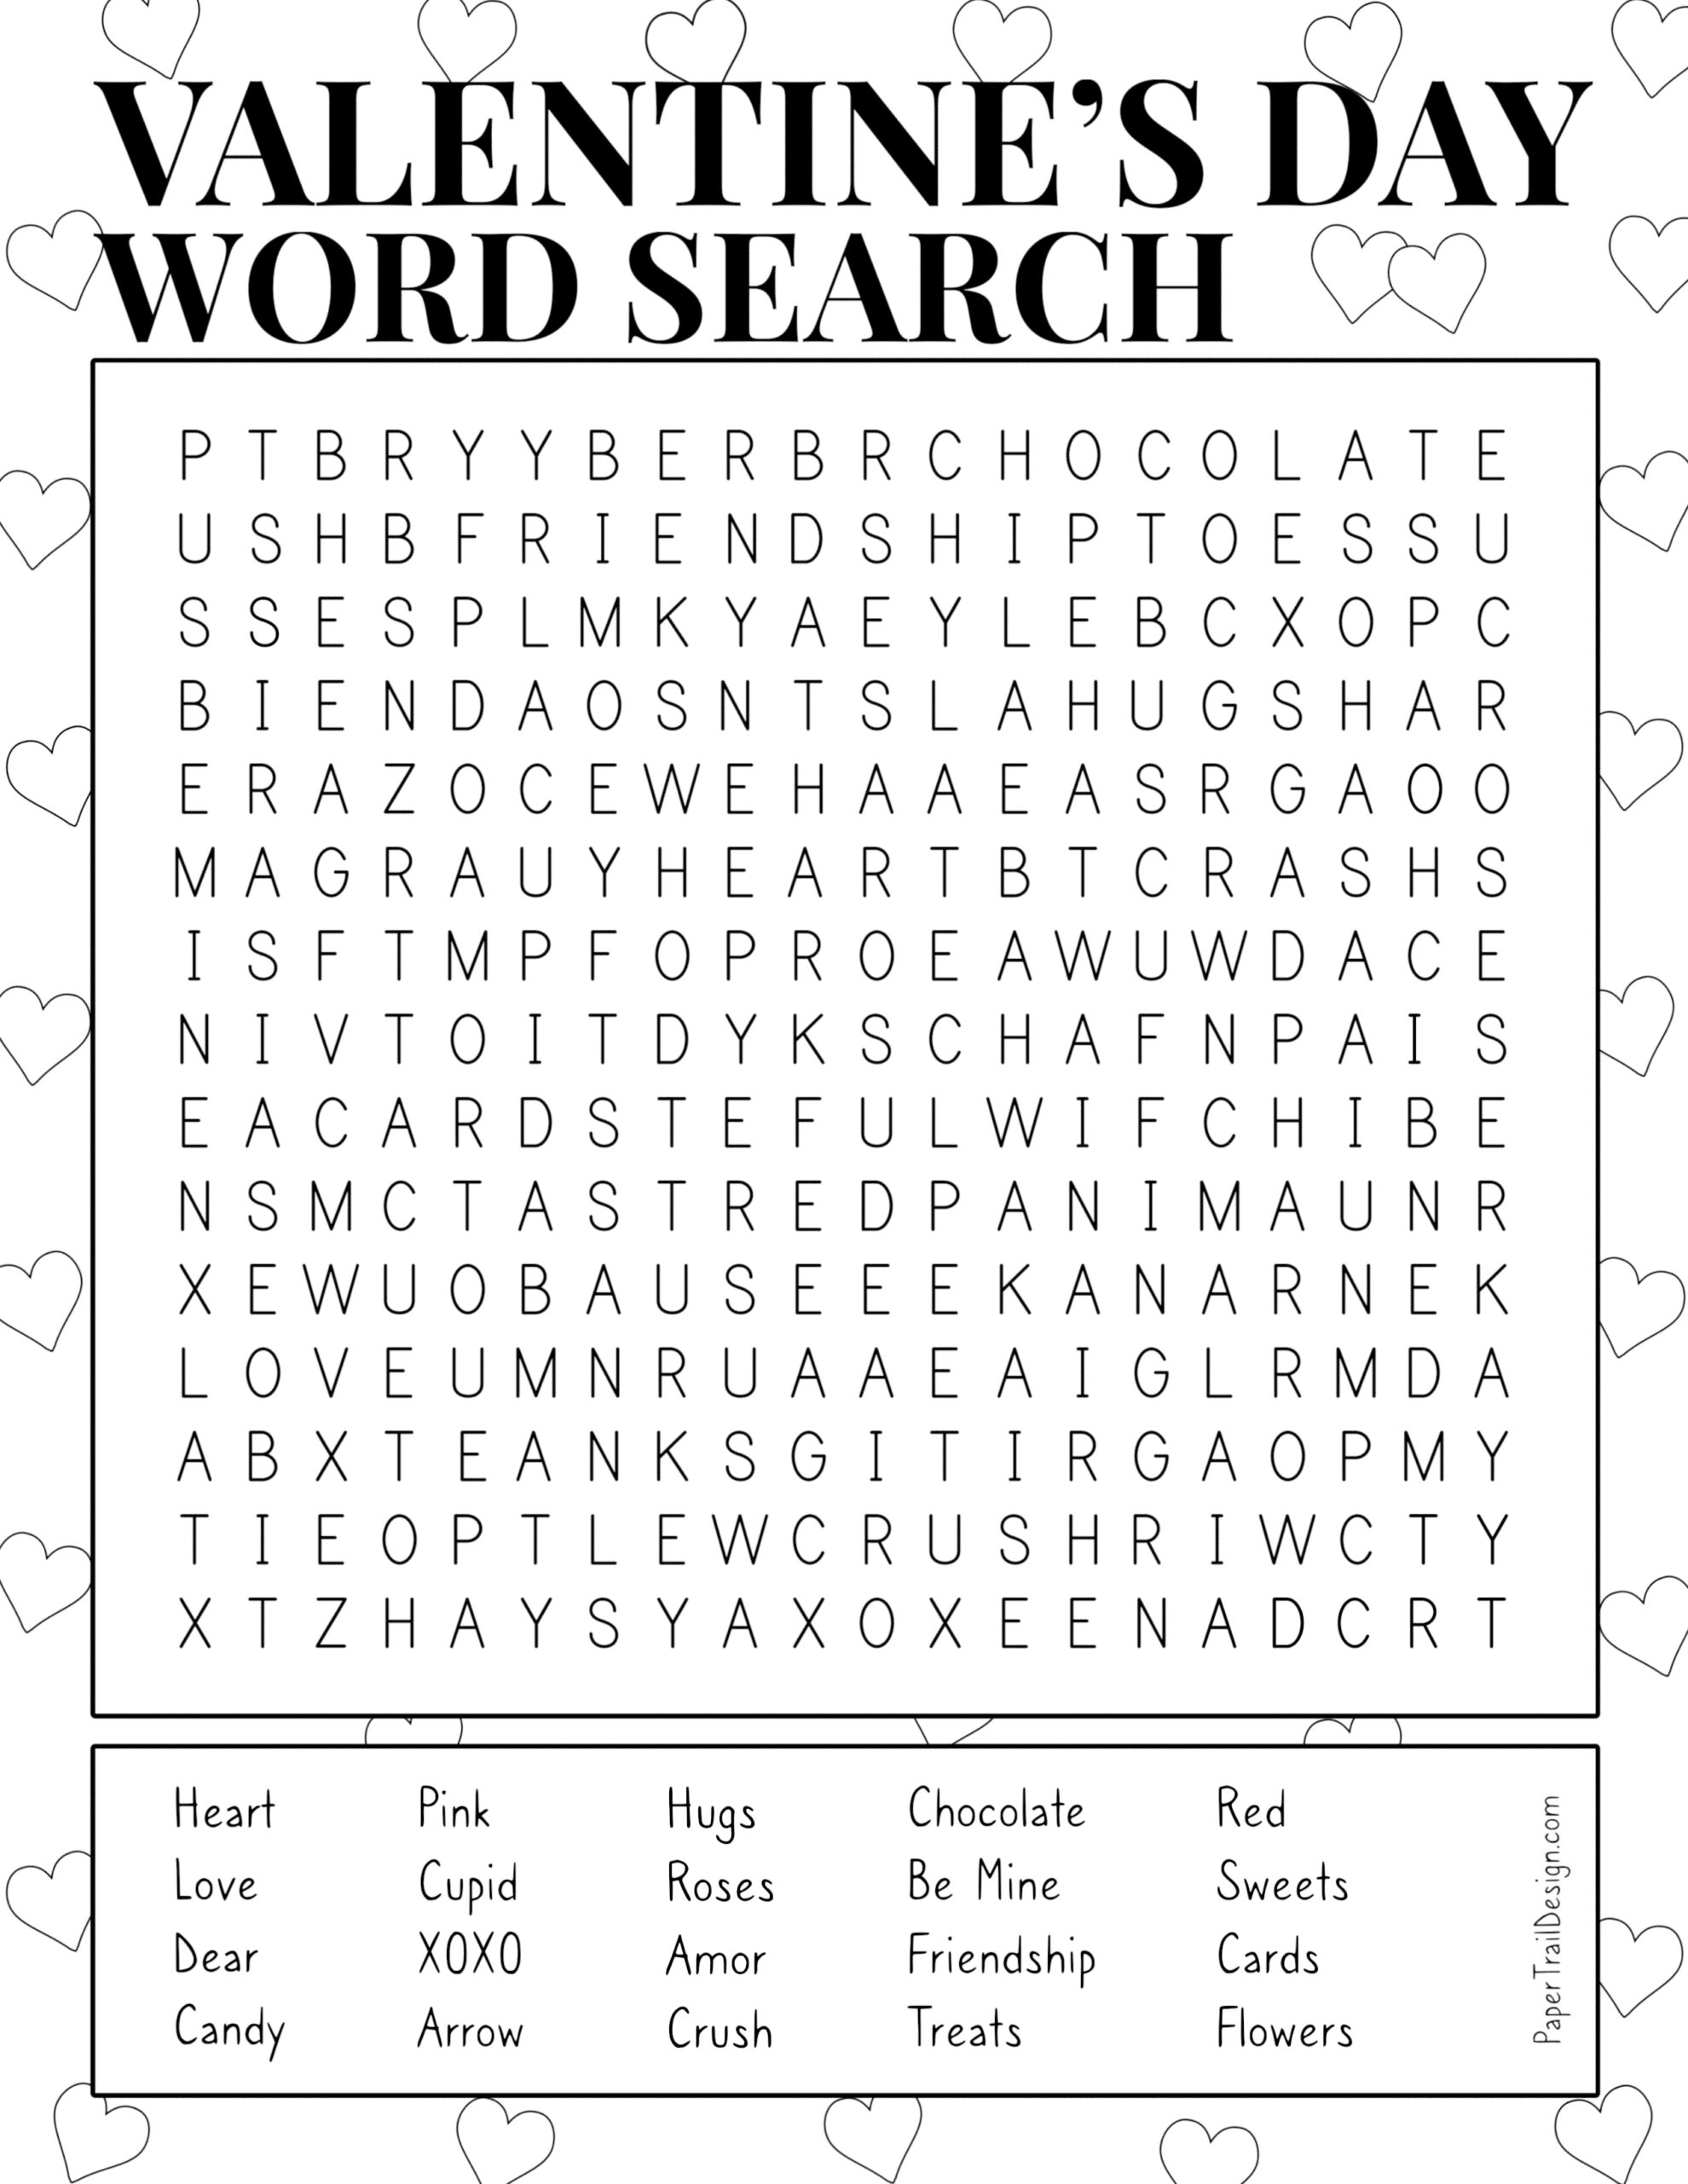 Valentines day word search printable